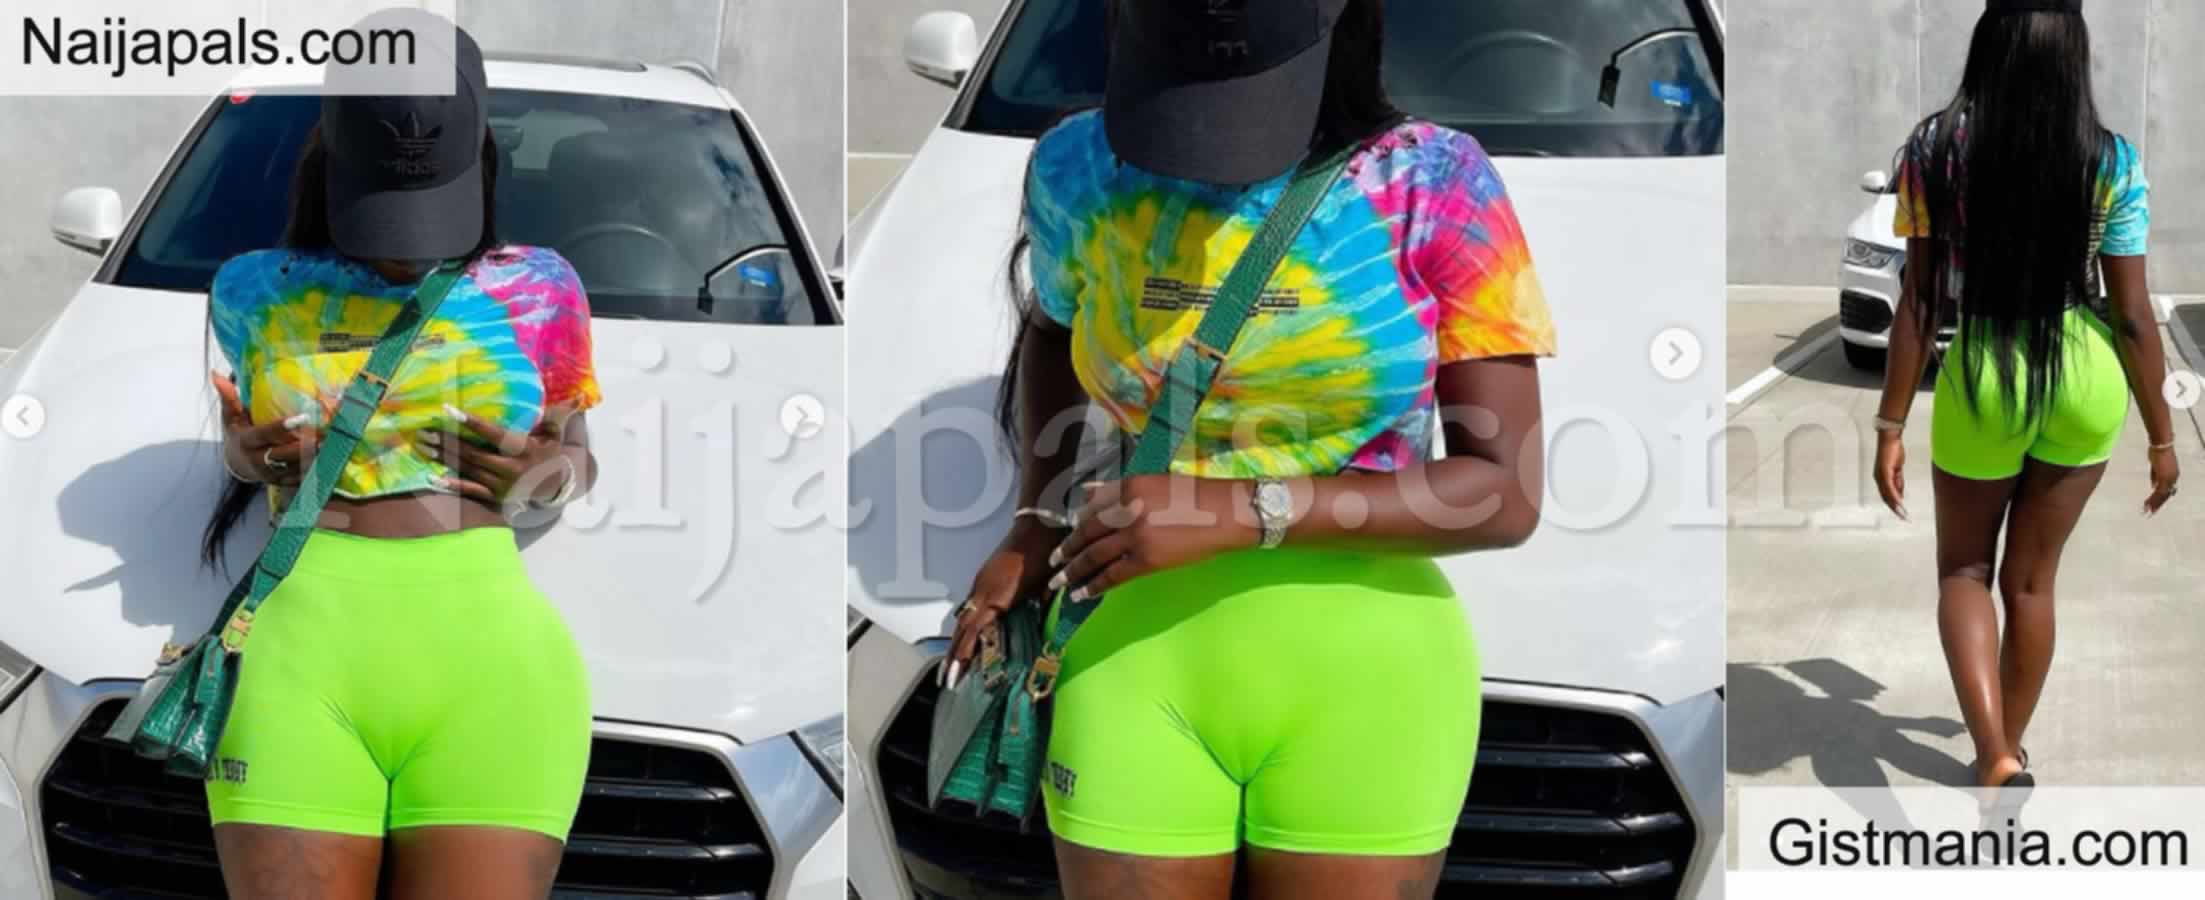 Online Users React To BBN, Khloe As She Publicly Displays Her Camel Toe In  These Photos - Gistmania